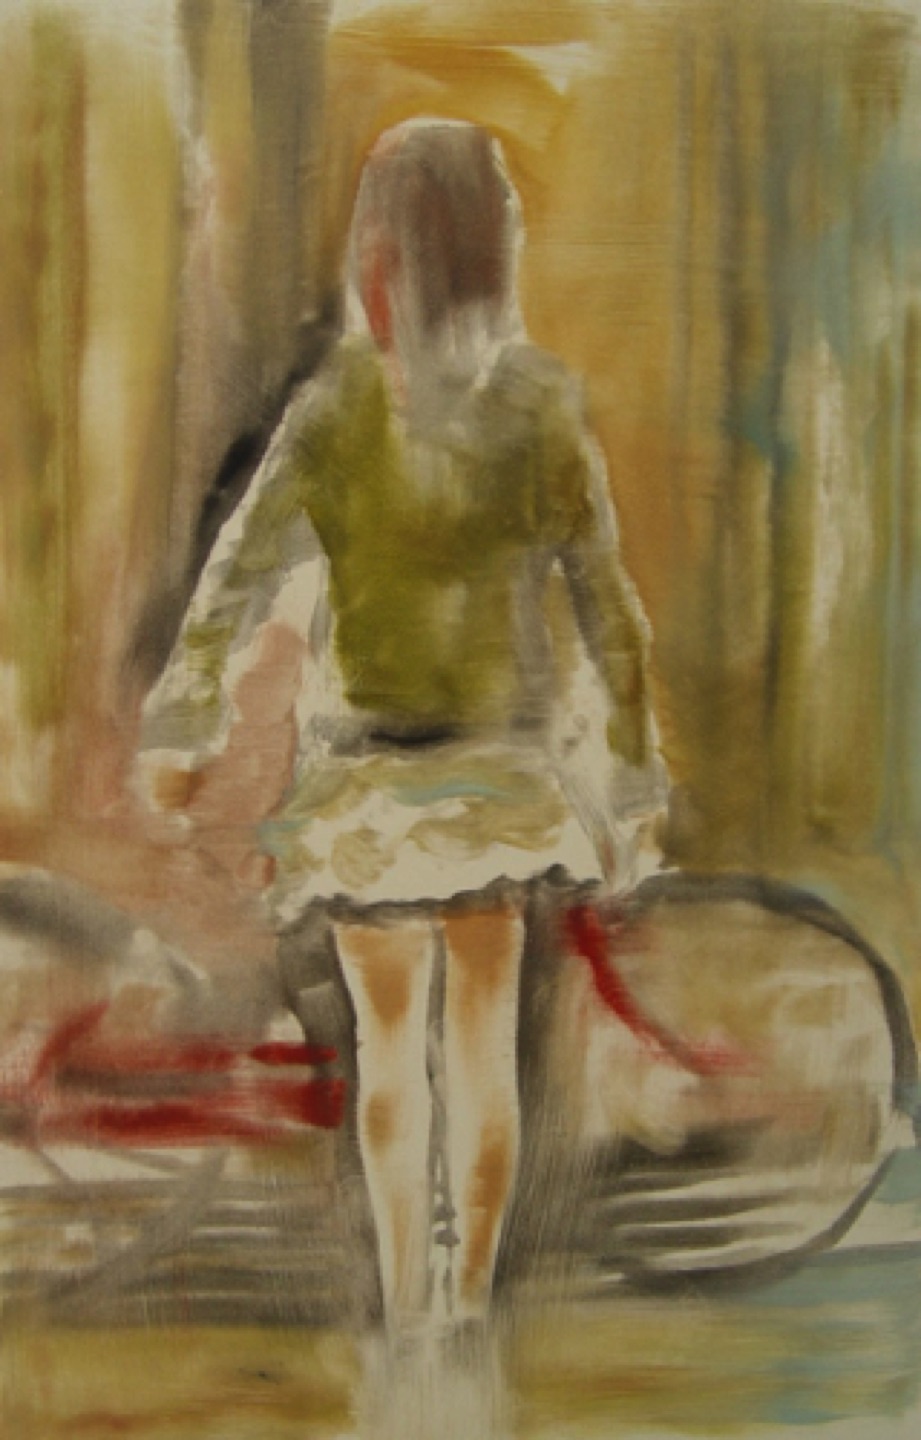 Gregg Chadwick
Stilled Life (Akihabara)
30"x22" monotype on paper 2011 
Private Collection, Pittsburgh, Pennsylvania